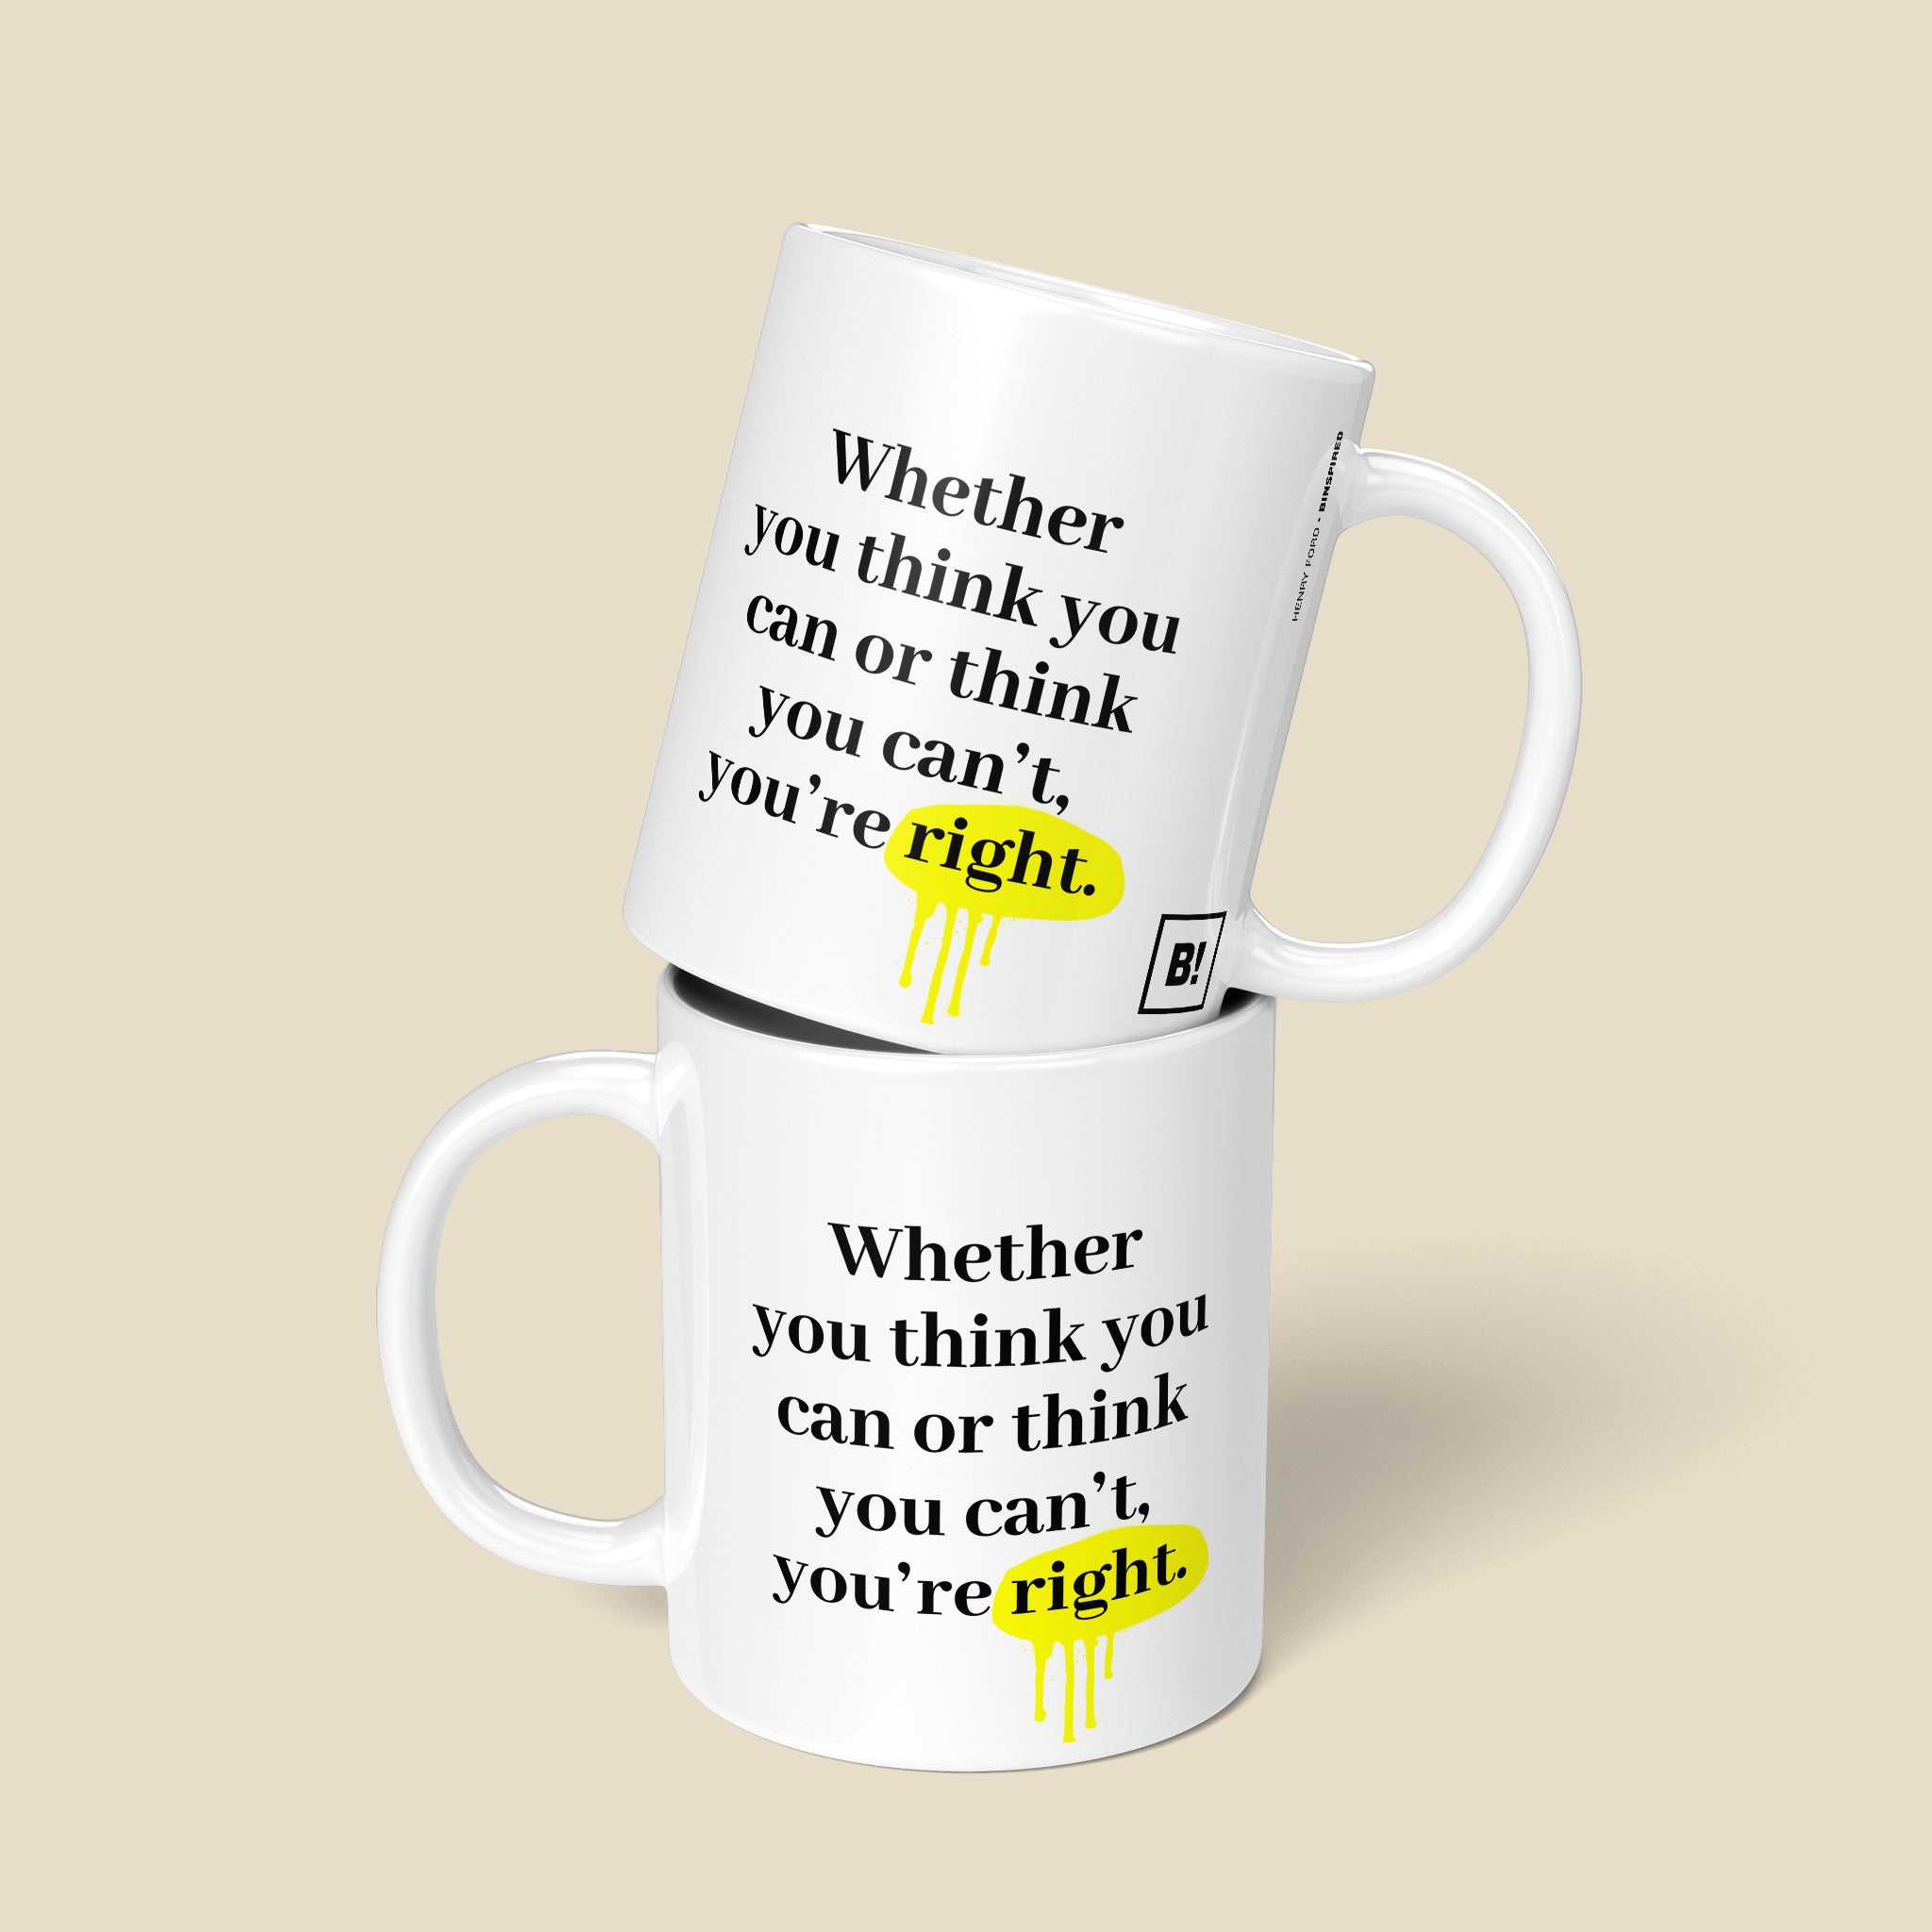 Be inspired by Henry Ford's famous quote, "Whether you think you can or think you can't, you're right" on this 11oz white glossy coffee mug with a front and back view.